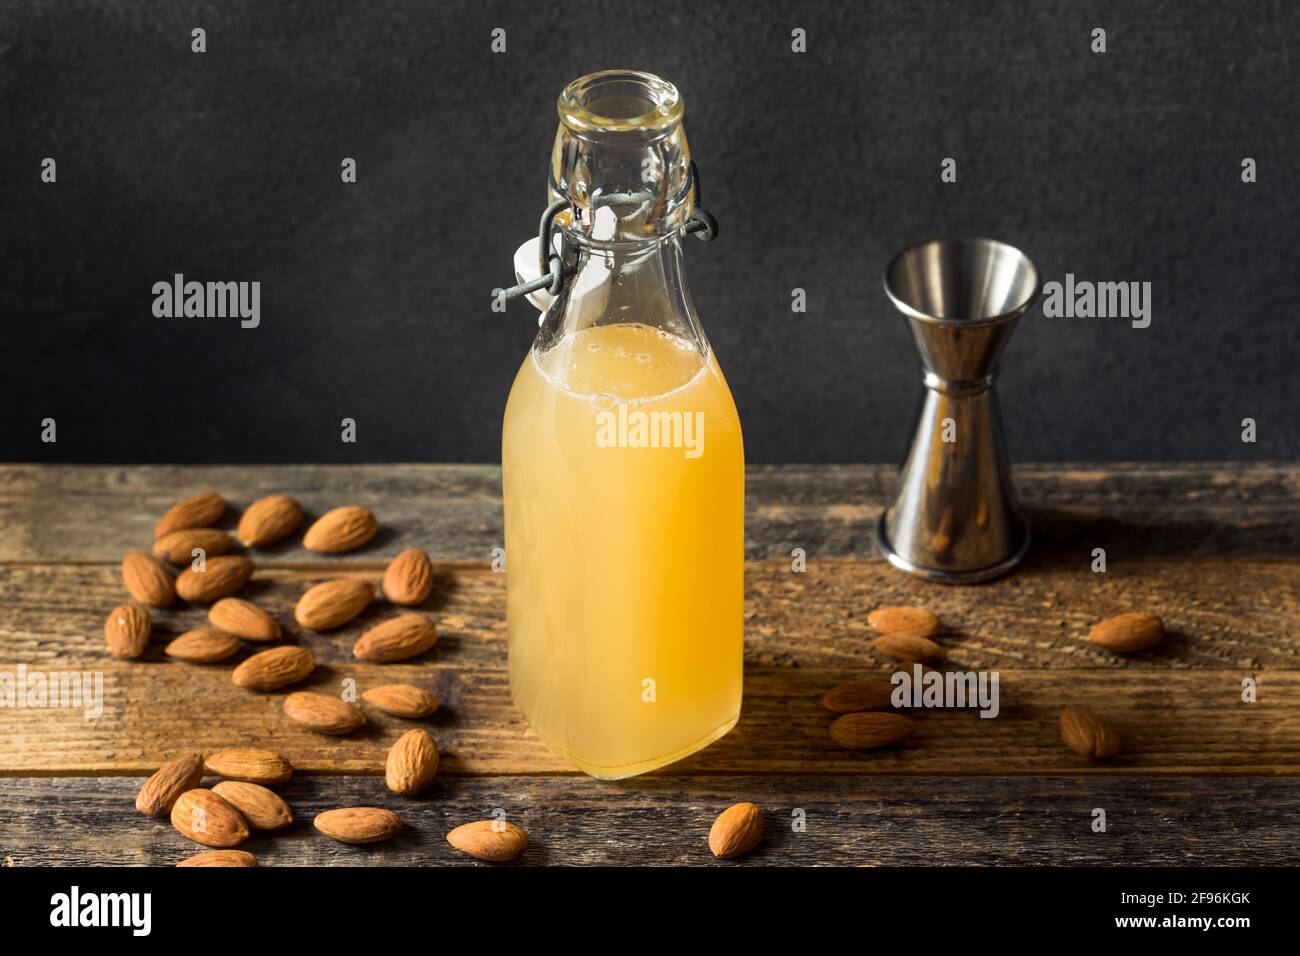 Sweet Refreshing Almond Orgeat Syrup for Mixing Cocktails Stock Photo